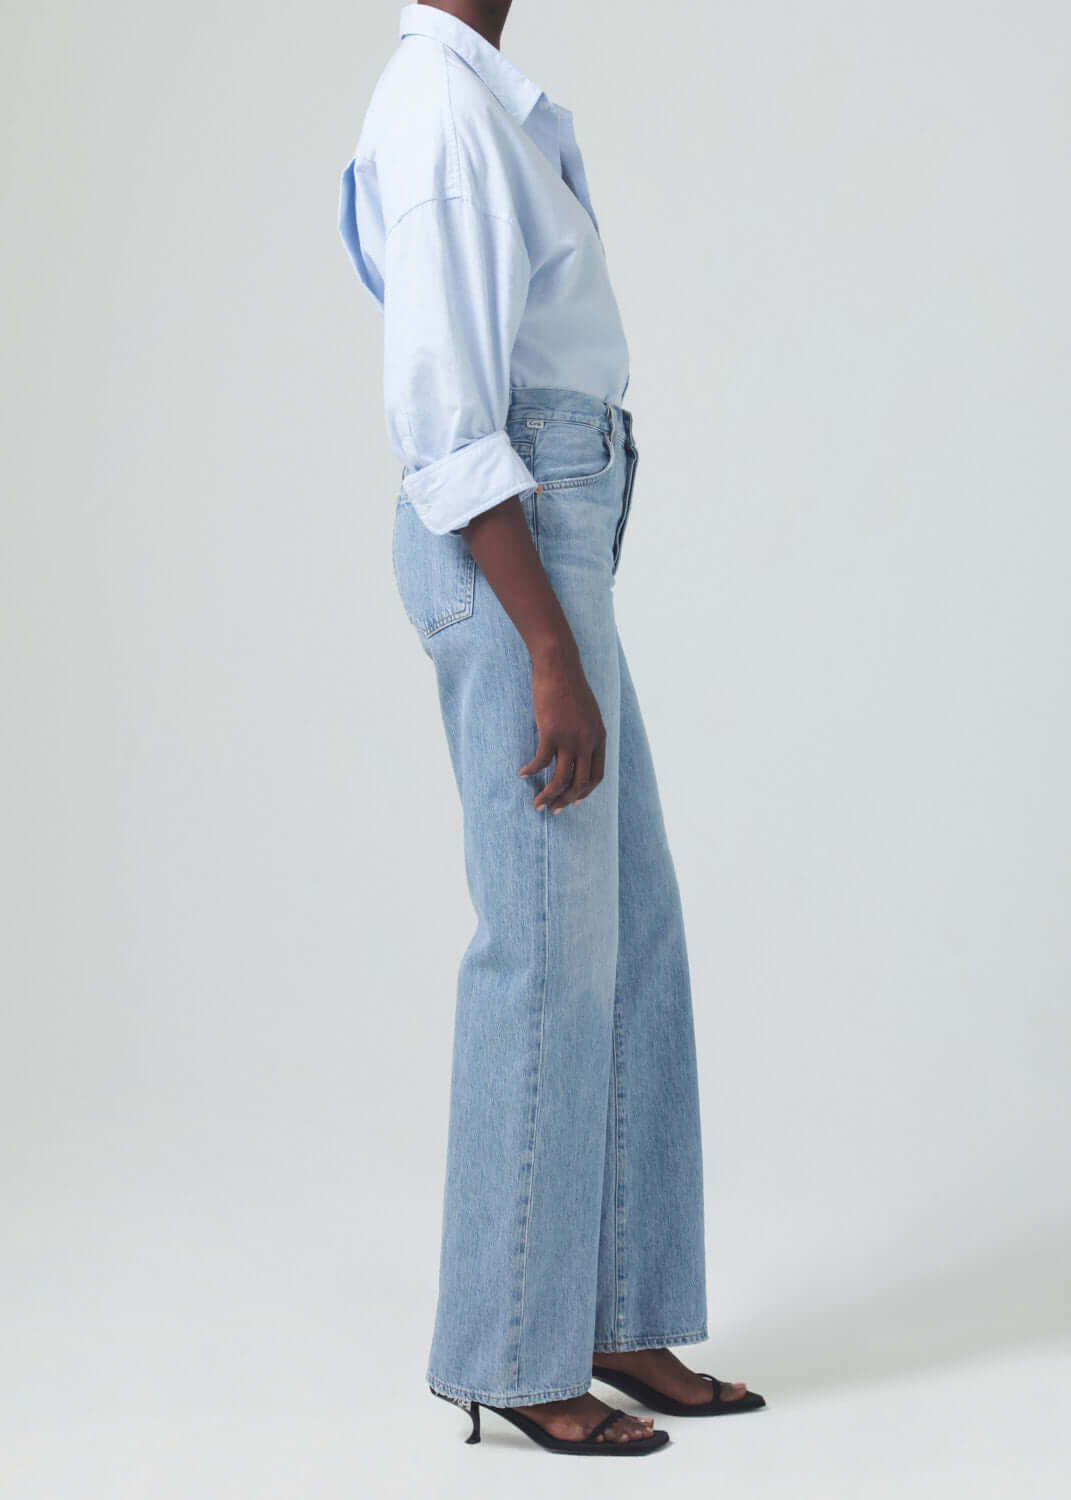 Citizens Of Humanity Annina Trouser in Tularosa available at TNT The New Trend Australia.